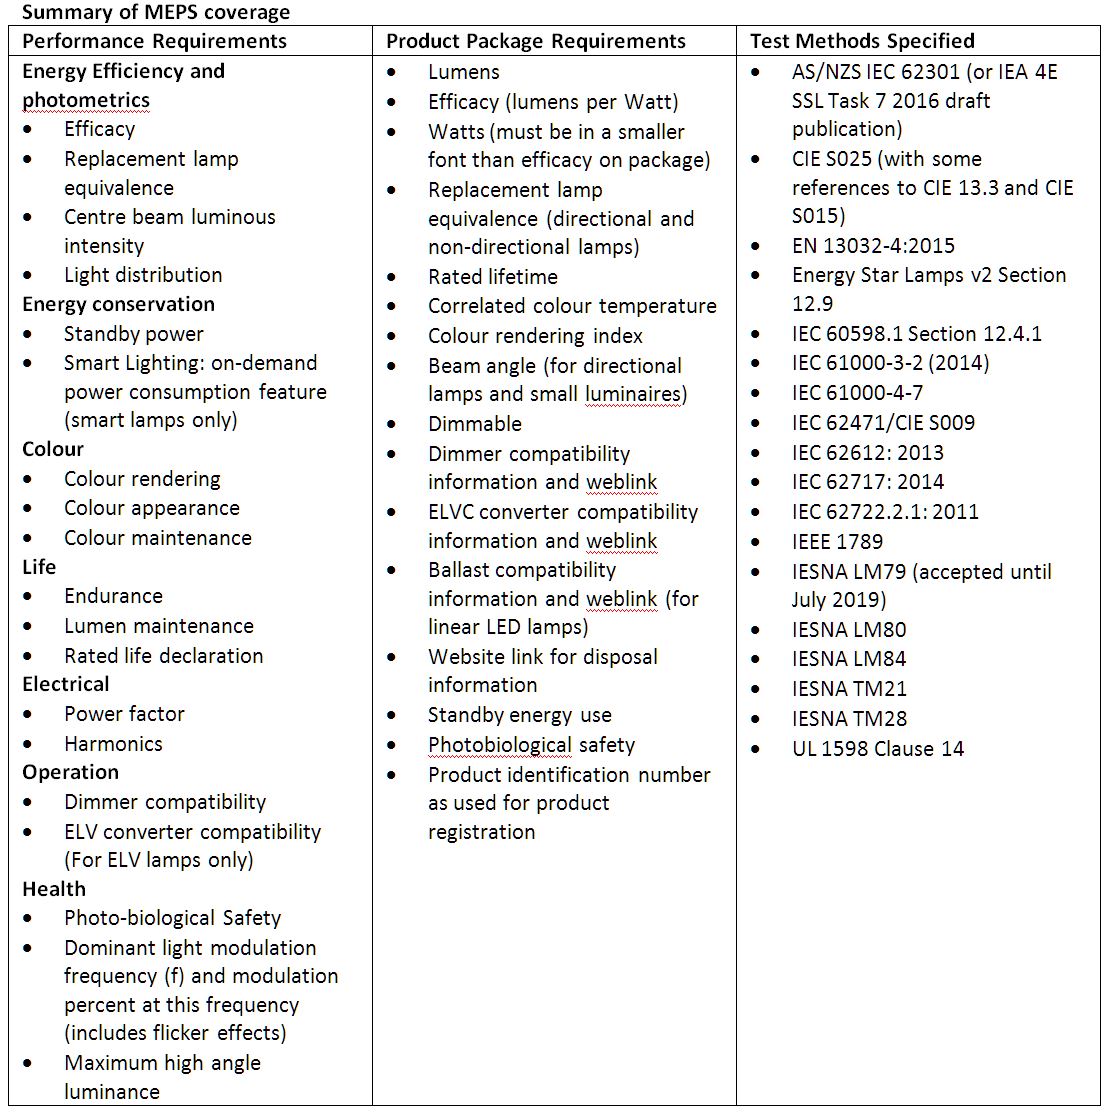 Table showing summary of LED MEPS coverage